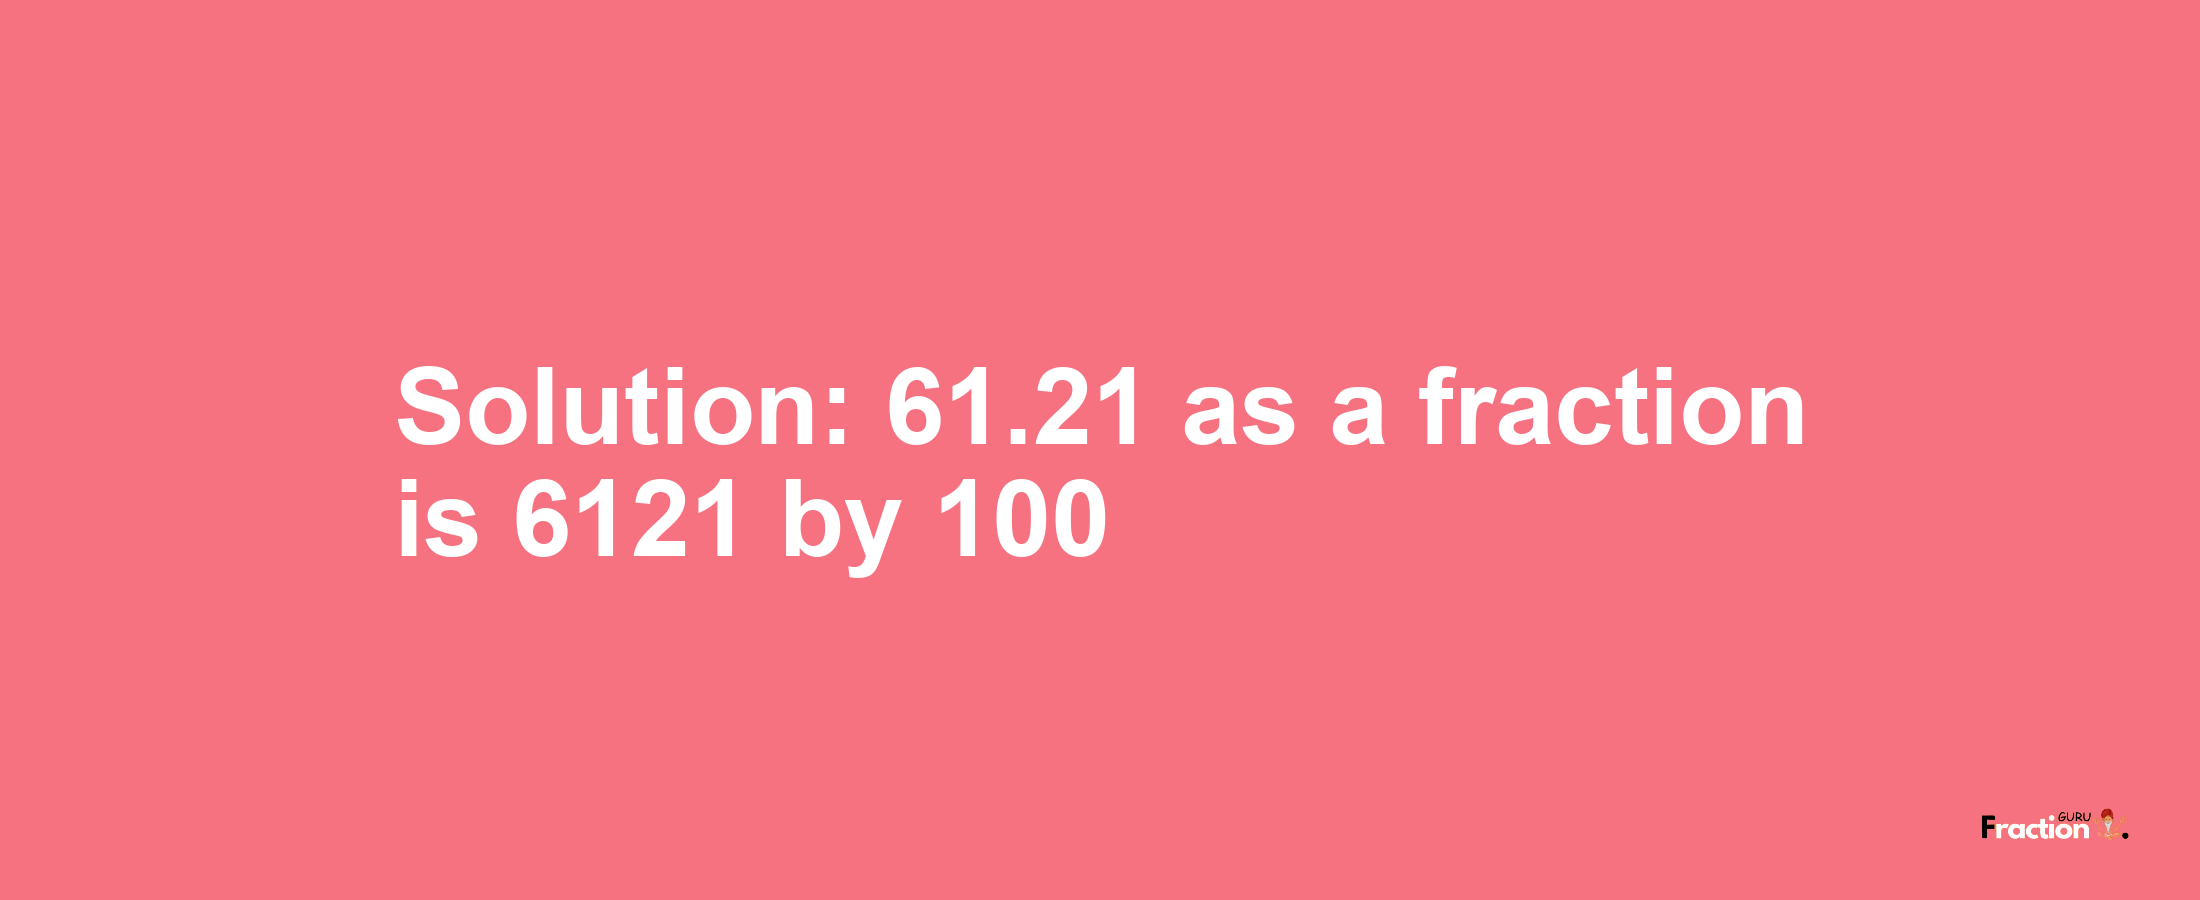 Solution:61.21 as a fraction is 6121/100